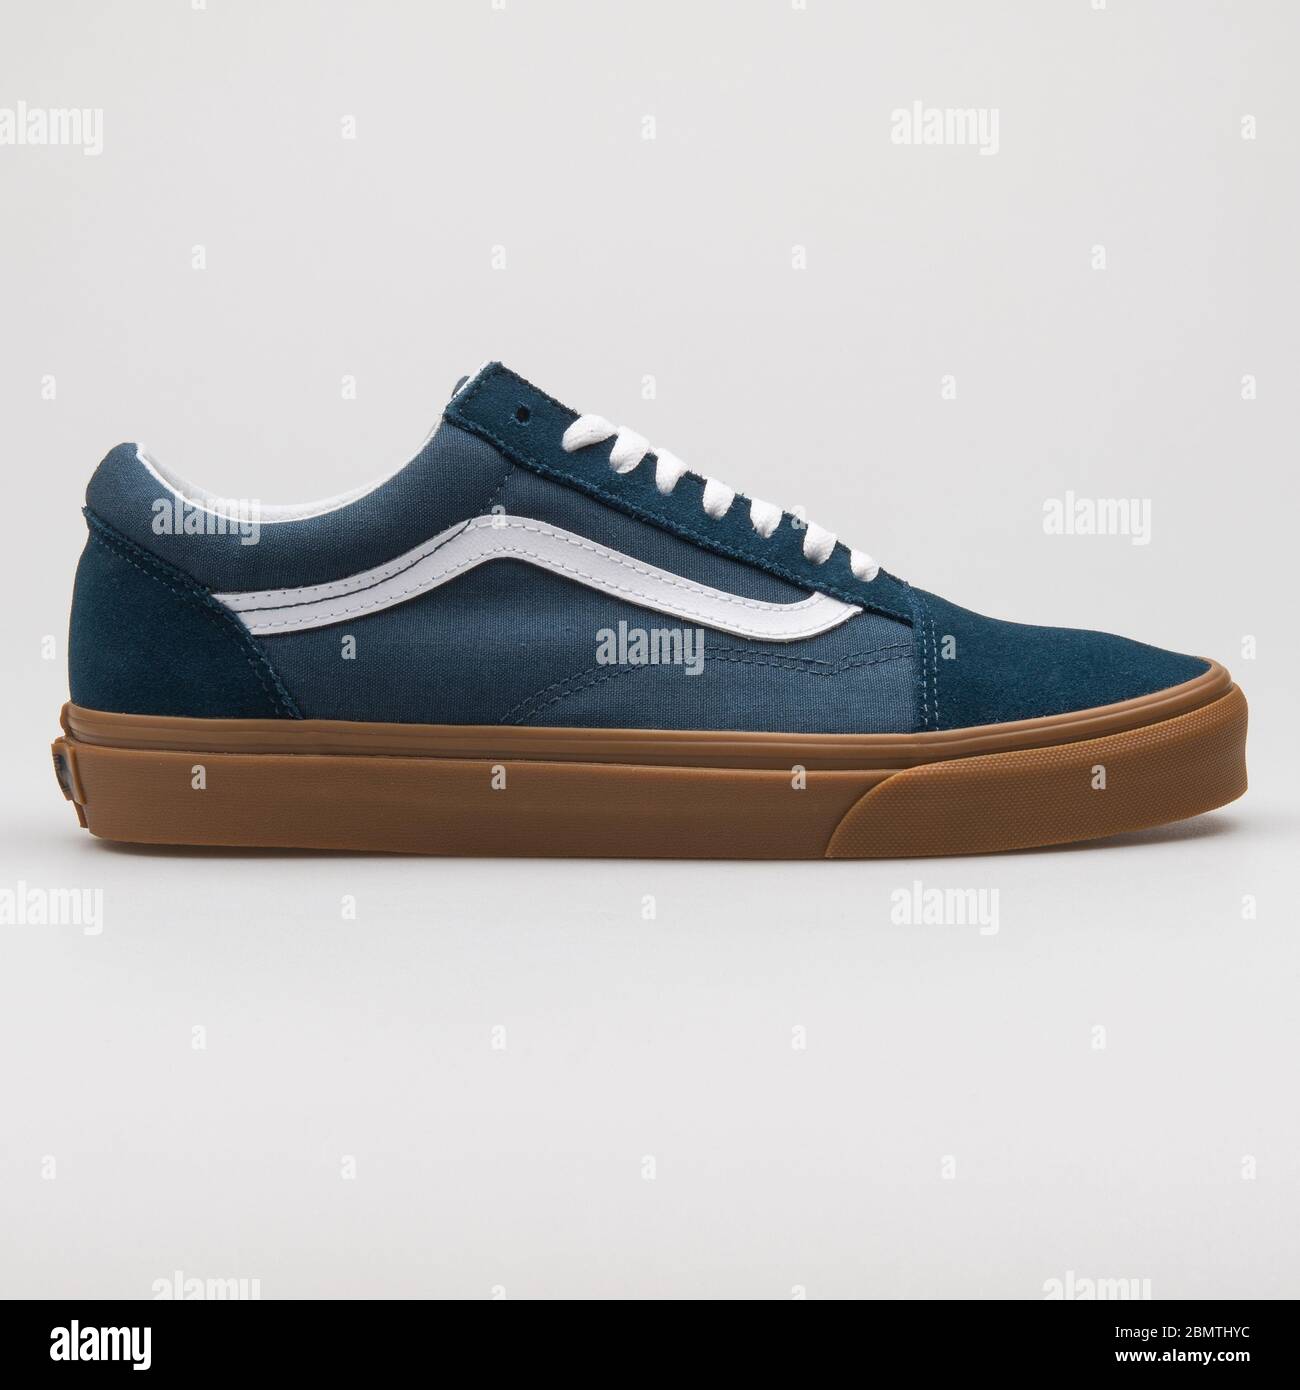 VIENNA, AUSTRIA - FEBRUARY 14, 2018: Vans Old Skool Reflect blue and brown  sneaker on white background Stock Photo - Alamy